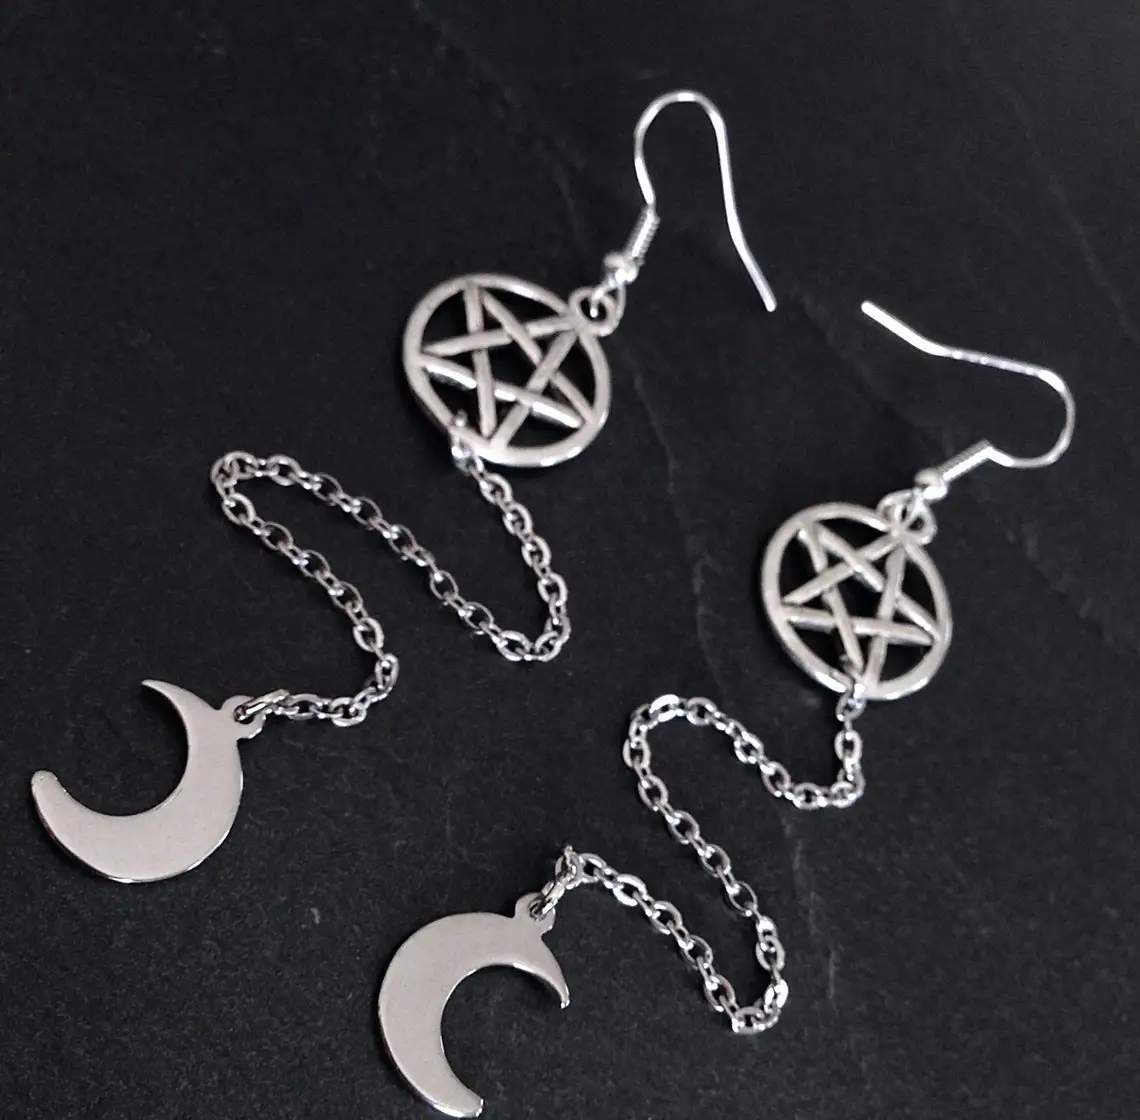 

New Pentagram Moon Earrings Silver, Crescent, Witchcraft, Gothic, Pagan, Moon Pendant Earrings